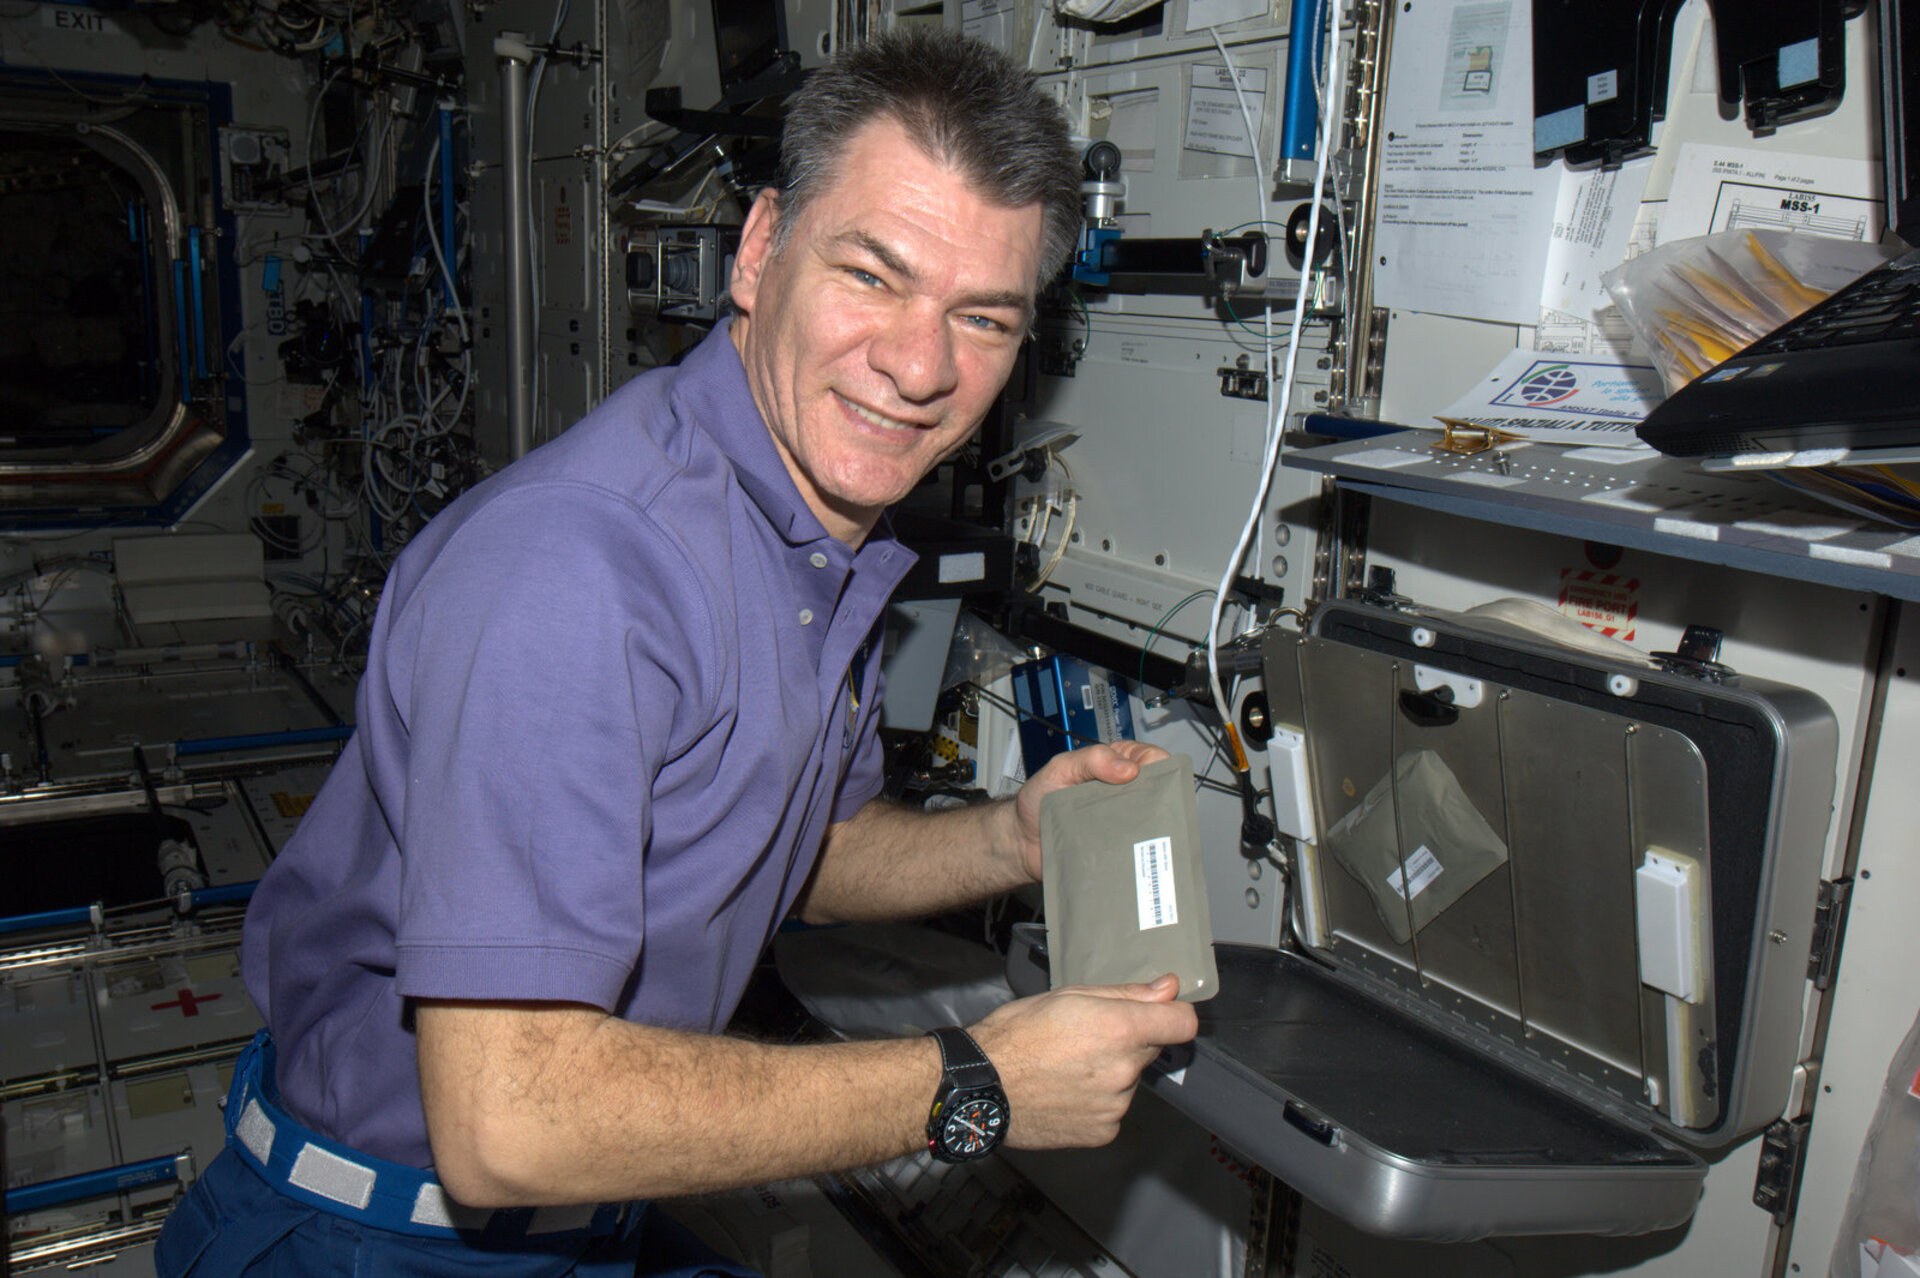 Paolo Nespoli shows a food warmer on ISS